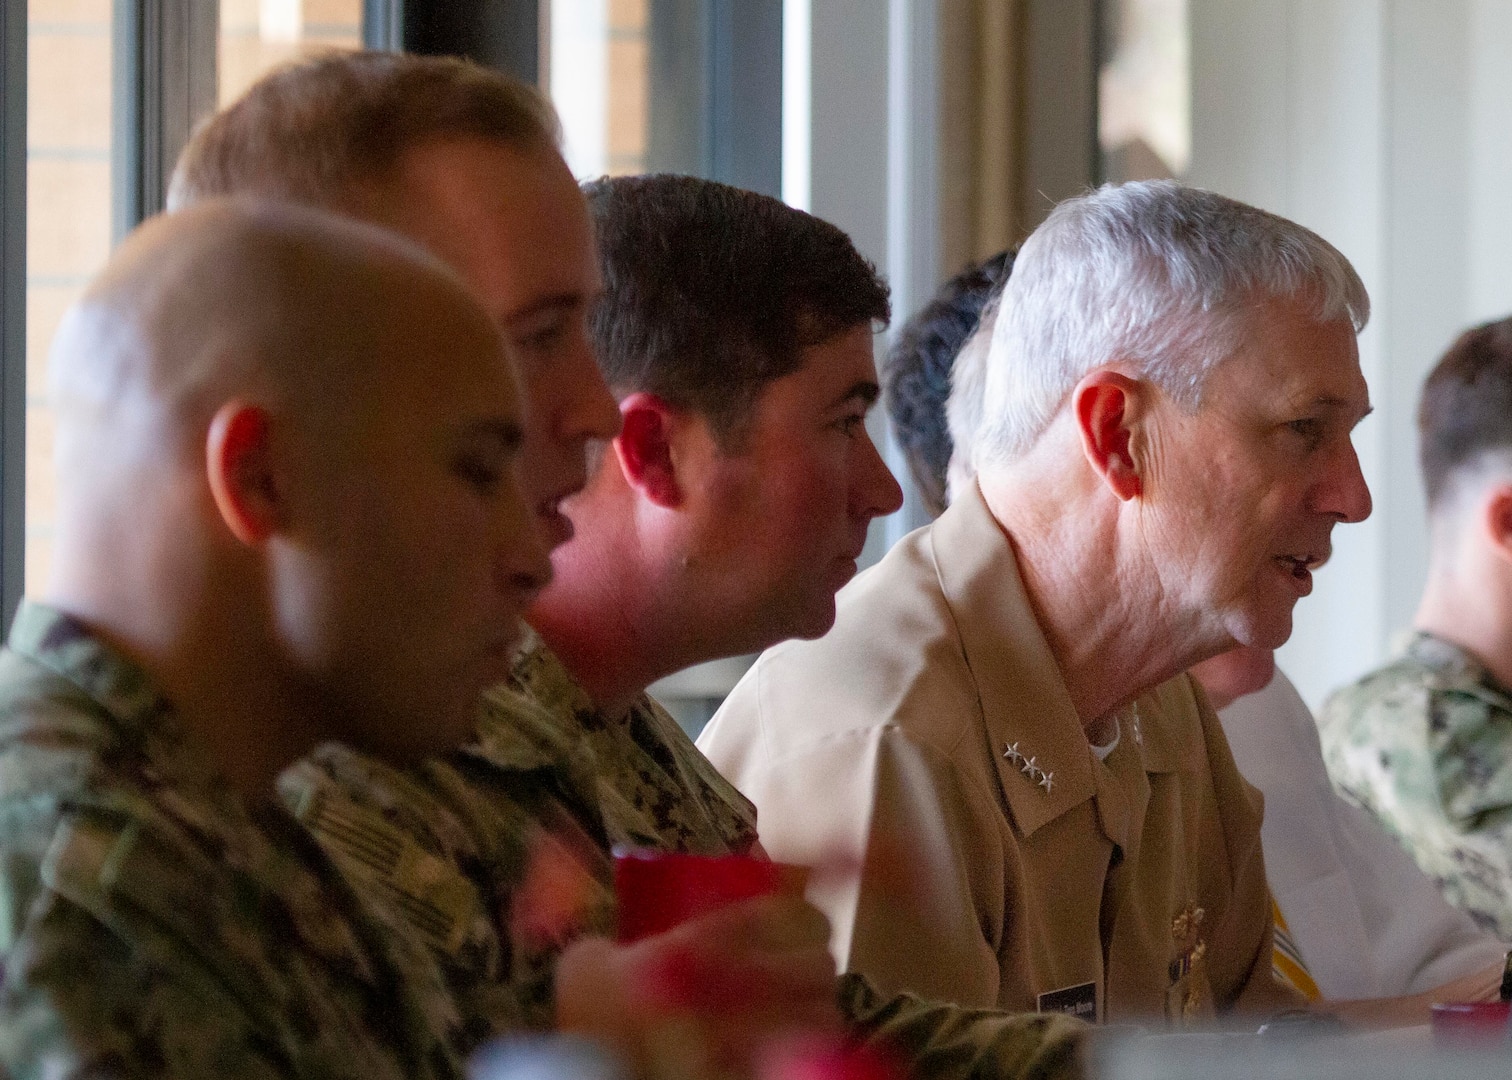 Vice Adm. Thomas Moore, commander, Naval Sea Systems Command (NAVSEA), visited Naval Surface Warfare Center Panama City Division (NSWC PCD) Jan. 7.

During his visit, Moore attended a luncheon with NSWC PCD Sailors.